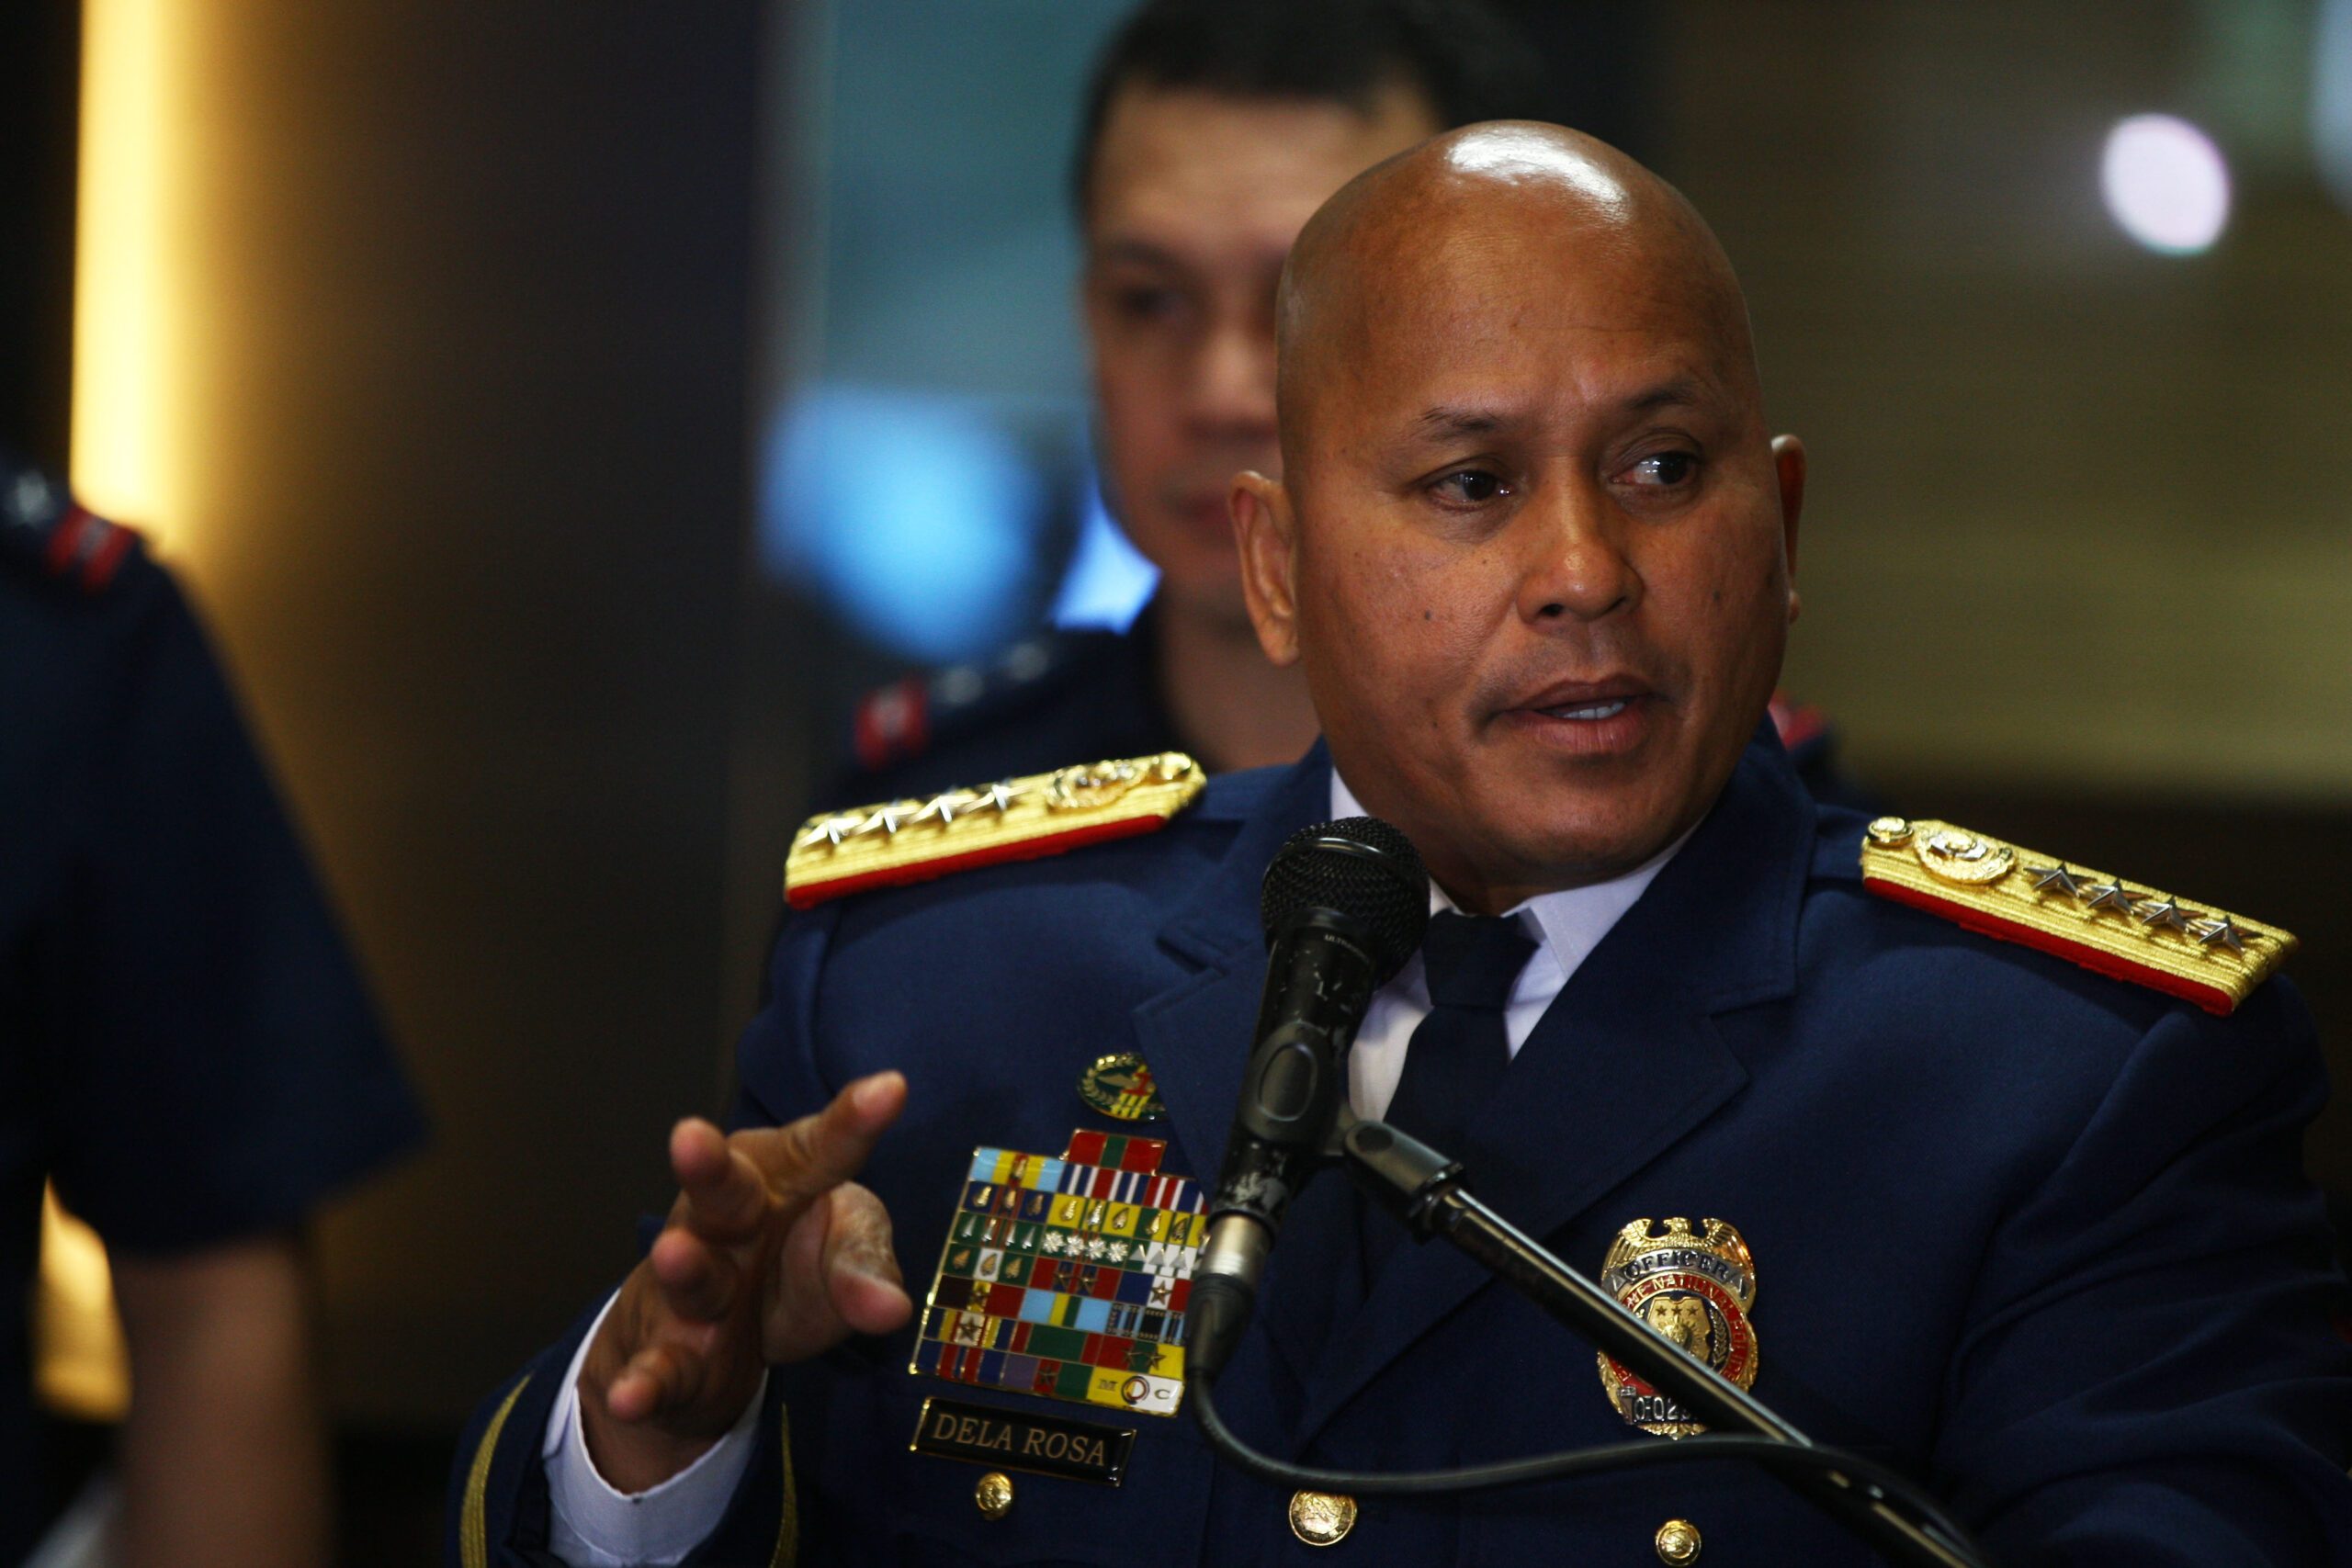 After war on drugs, it’s ‘war vs illegal gambling’ for PNP